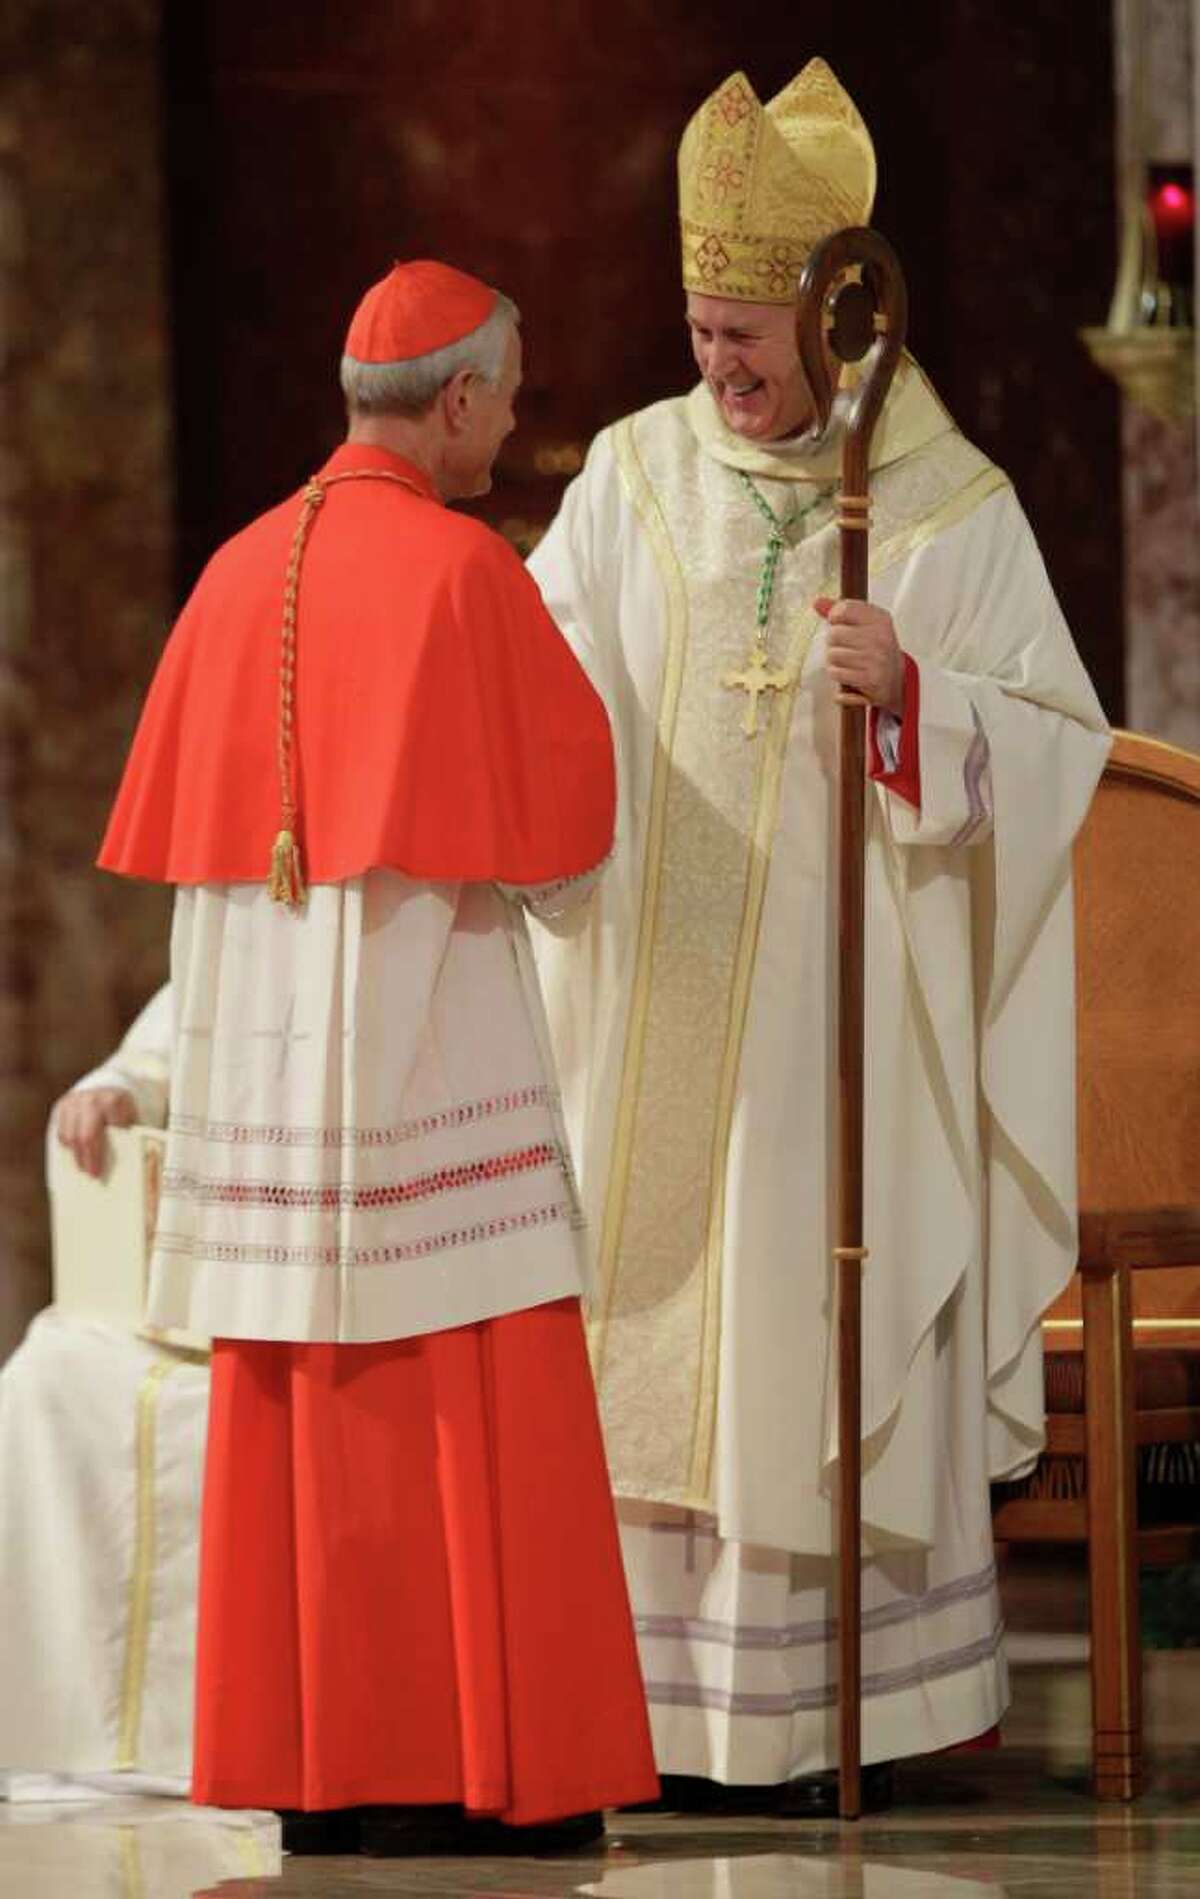 Cardinal Donald Wuerl, left, installs the Rev. Jeffrey Steenson as the first Ordinary, or head, of the Ordinariate of the Chair of Saint Peter.